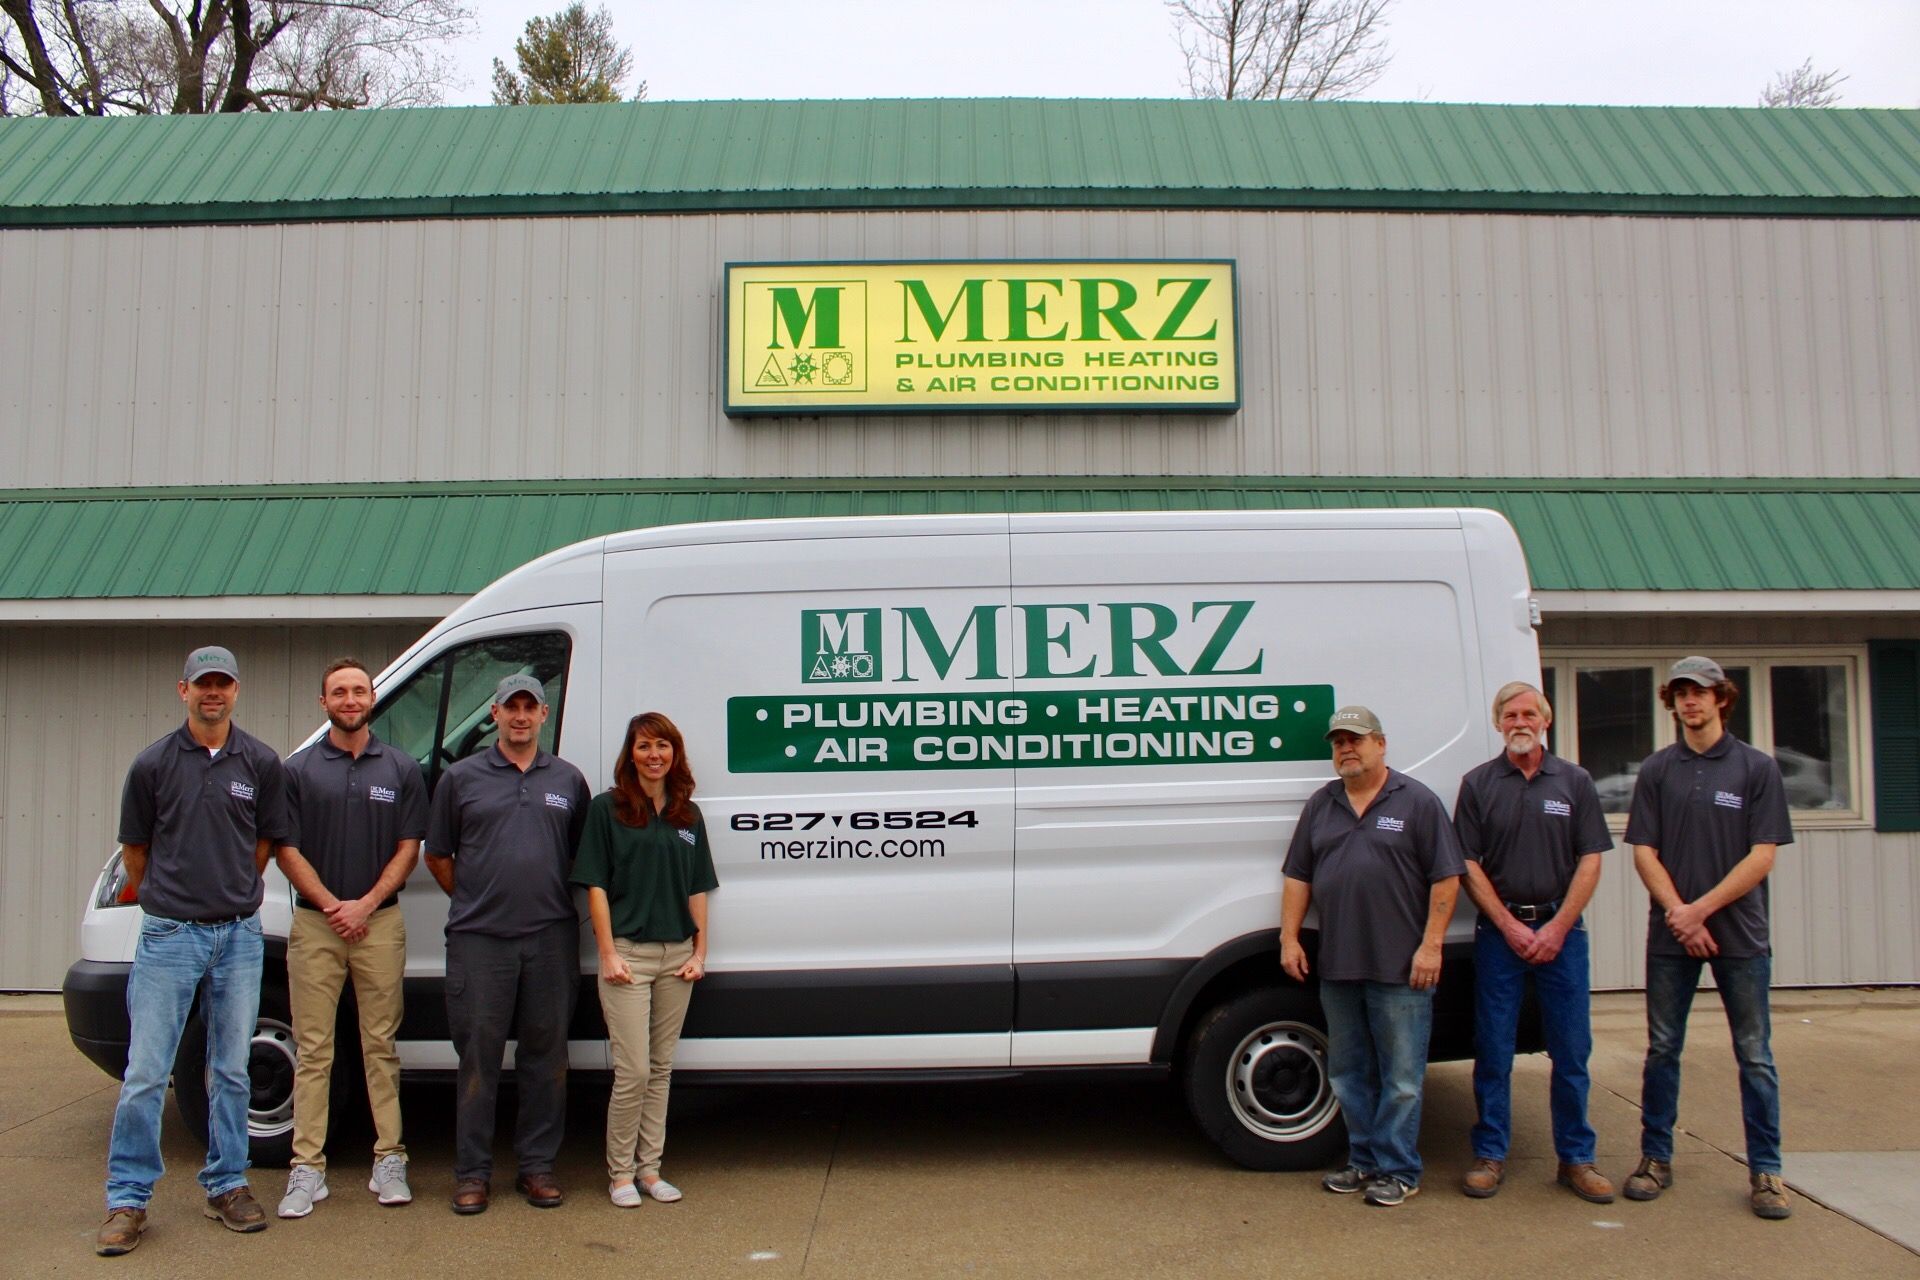 A group of people standing in front of a merz van